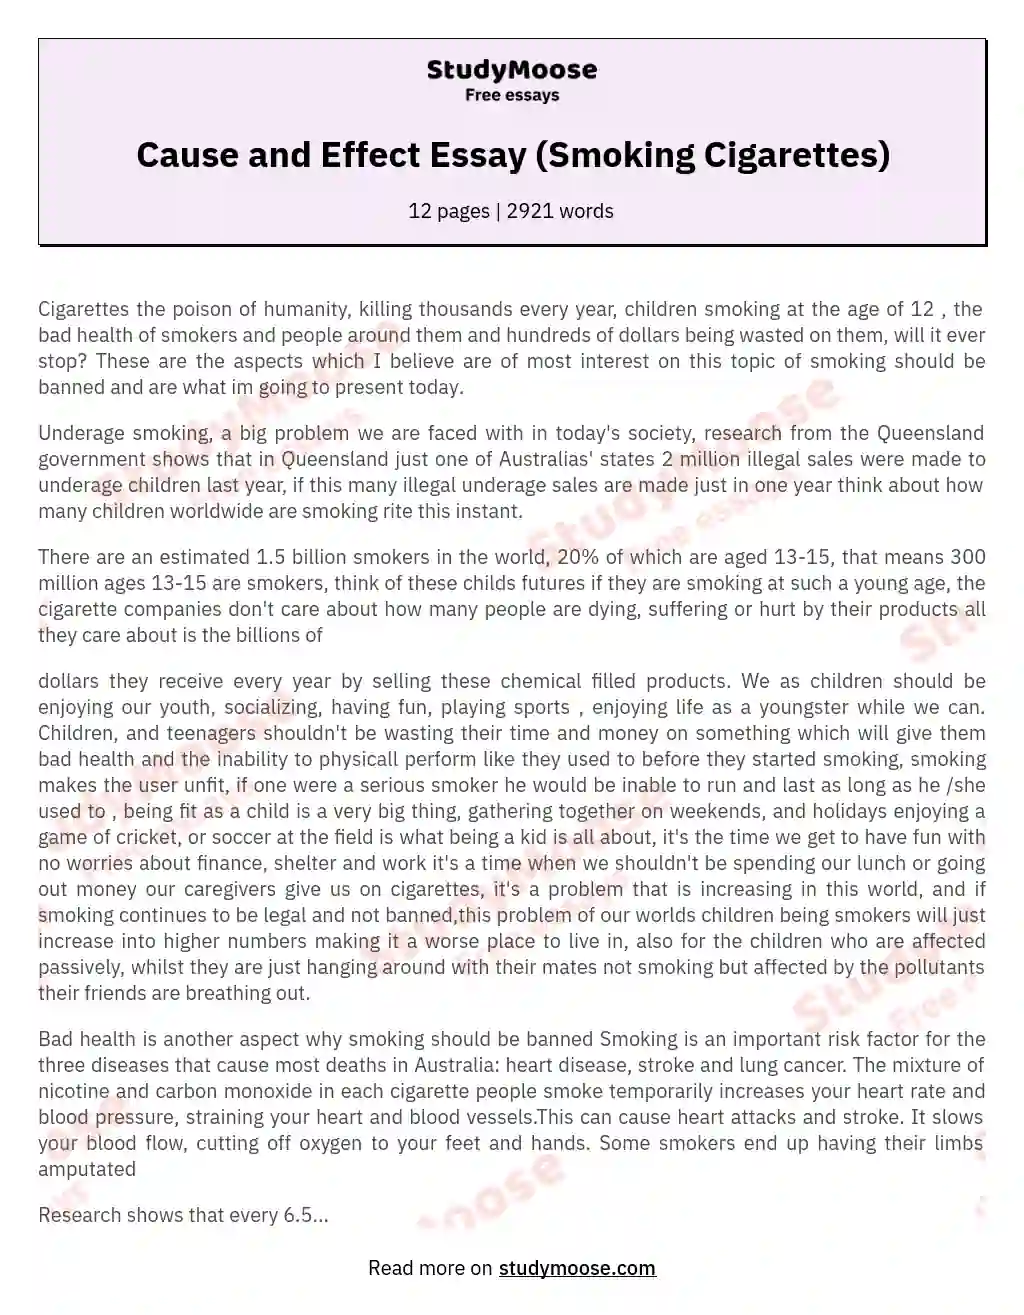 Cause and Effect Essay (Smoking Cigarettes) essay